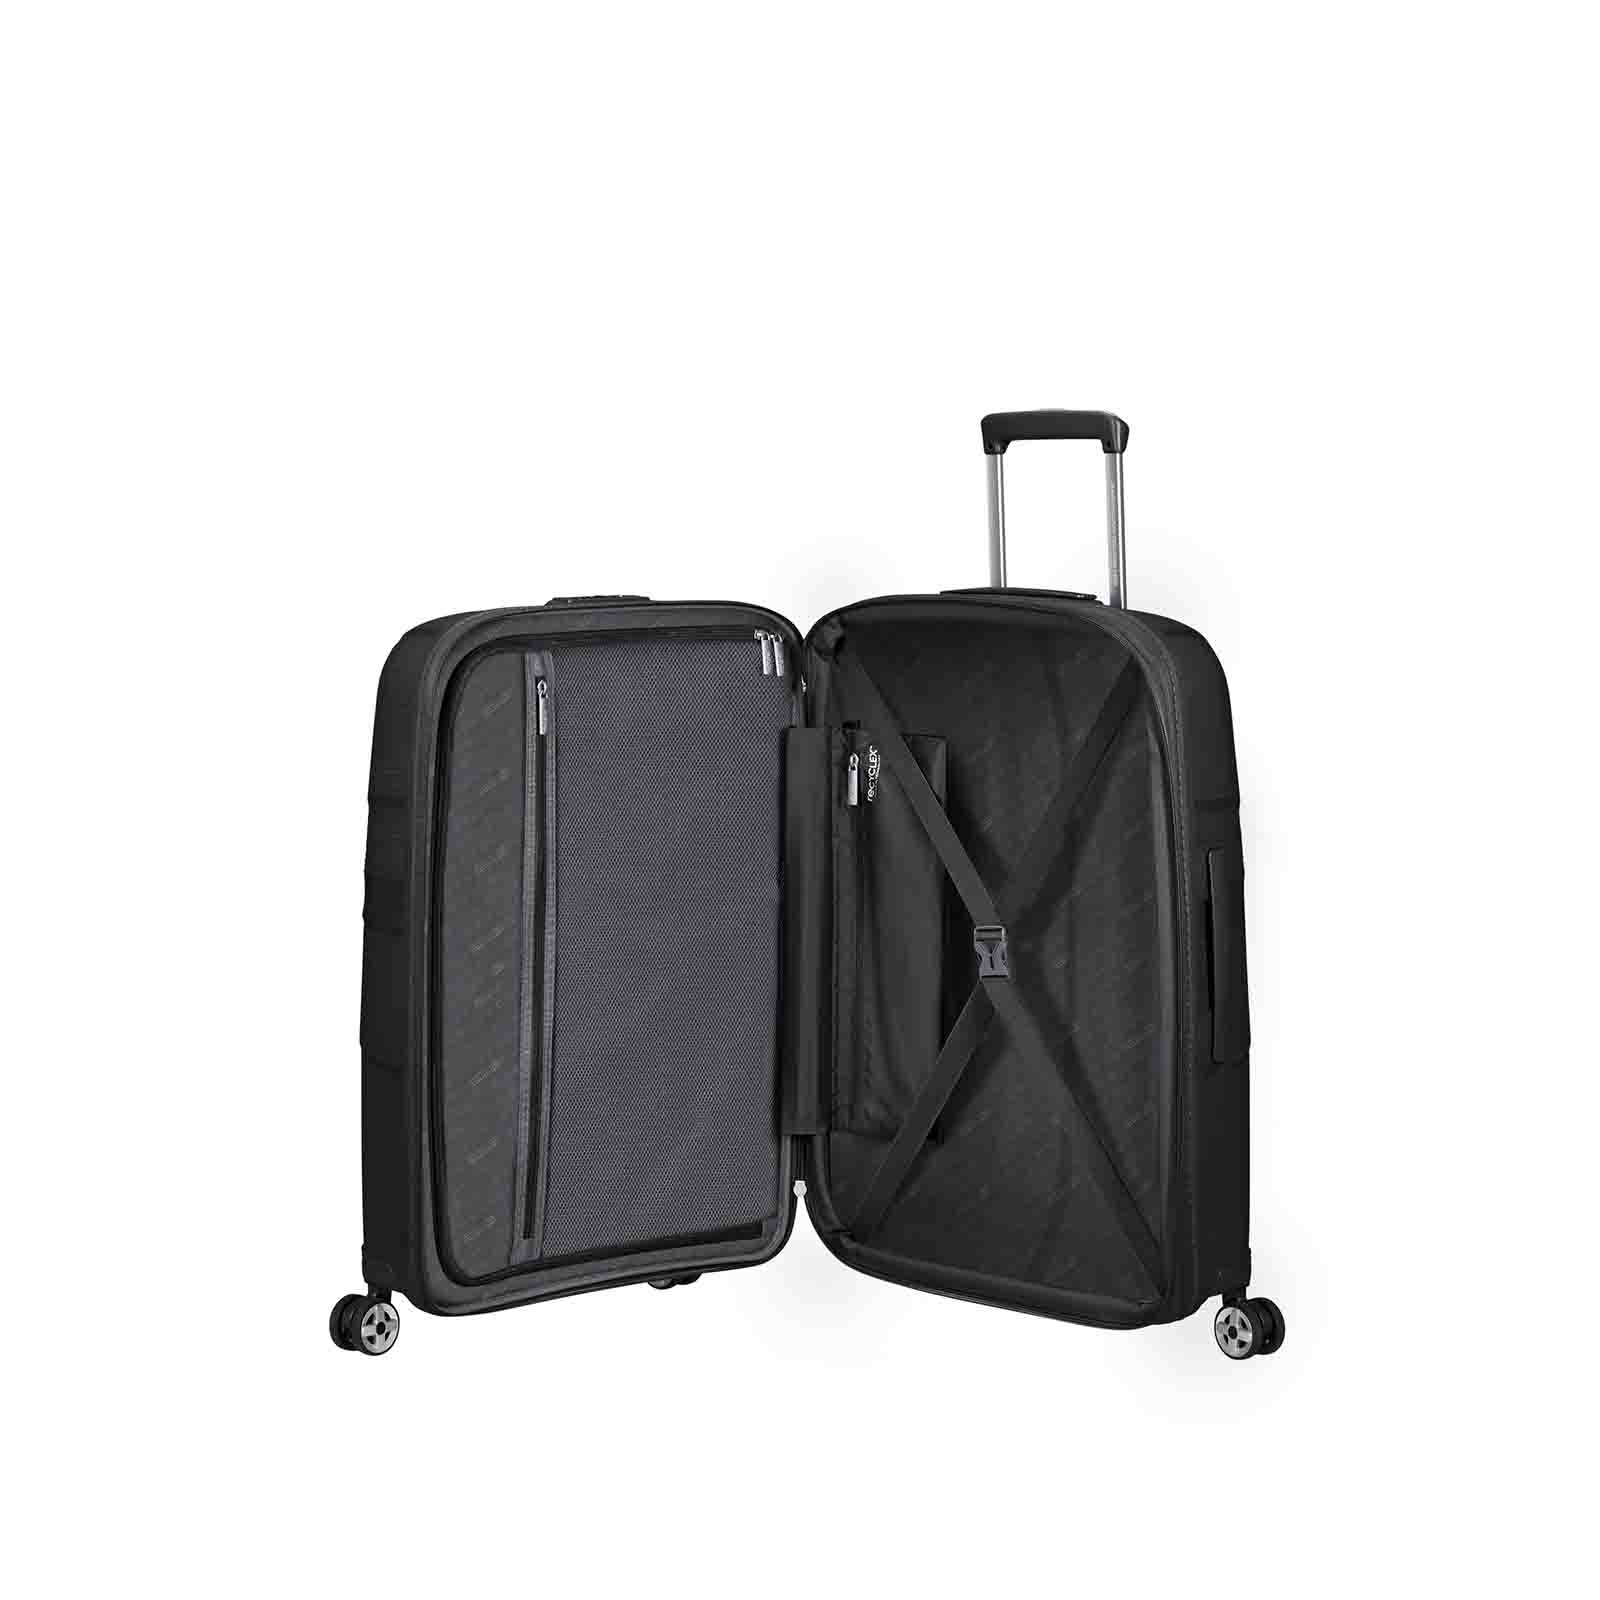 American-Tourister-Starvibe-67cm-Suitcase-Black-Open